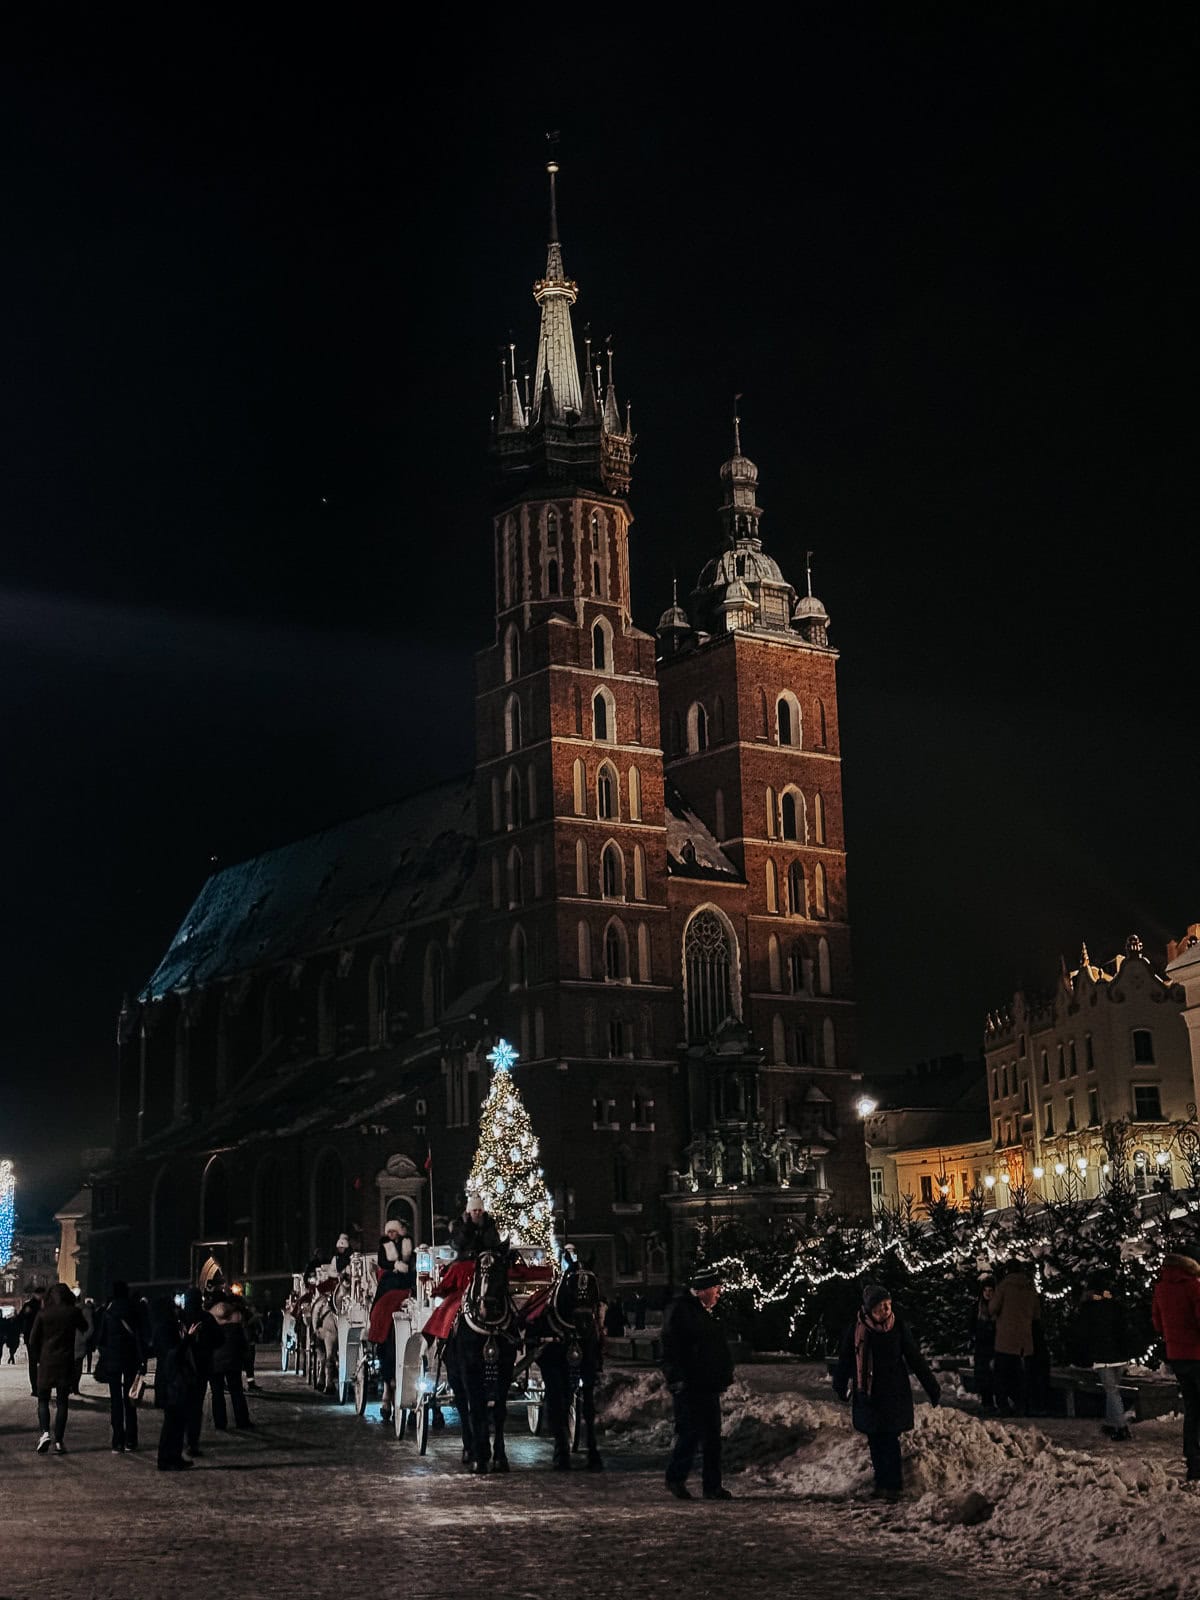 A captivating night scene of St. Mary's Basilica in Krakow, dramatically illuminated against the dark sky. The scene includes a beautifully lit Christmas tree and a horse-drawn carriage, surrounded by people enjoying the festive atmosphere at the Christmas market